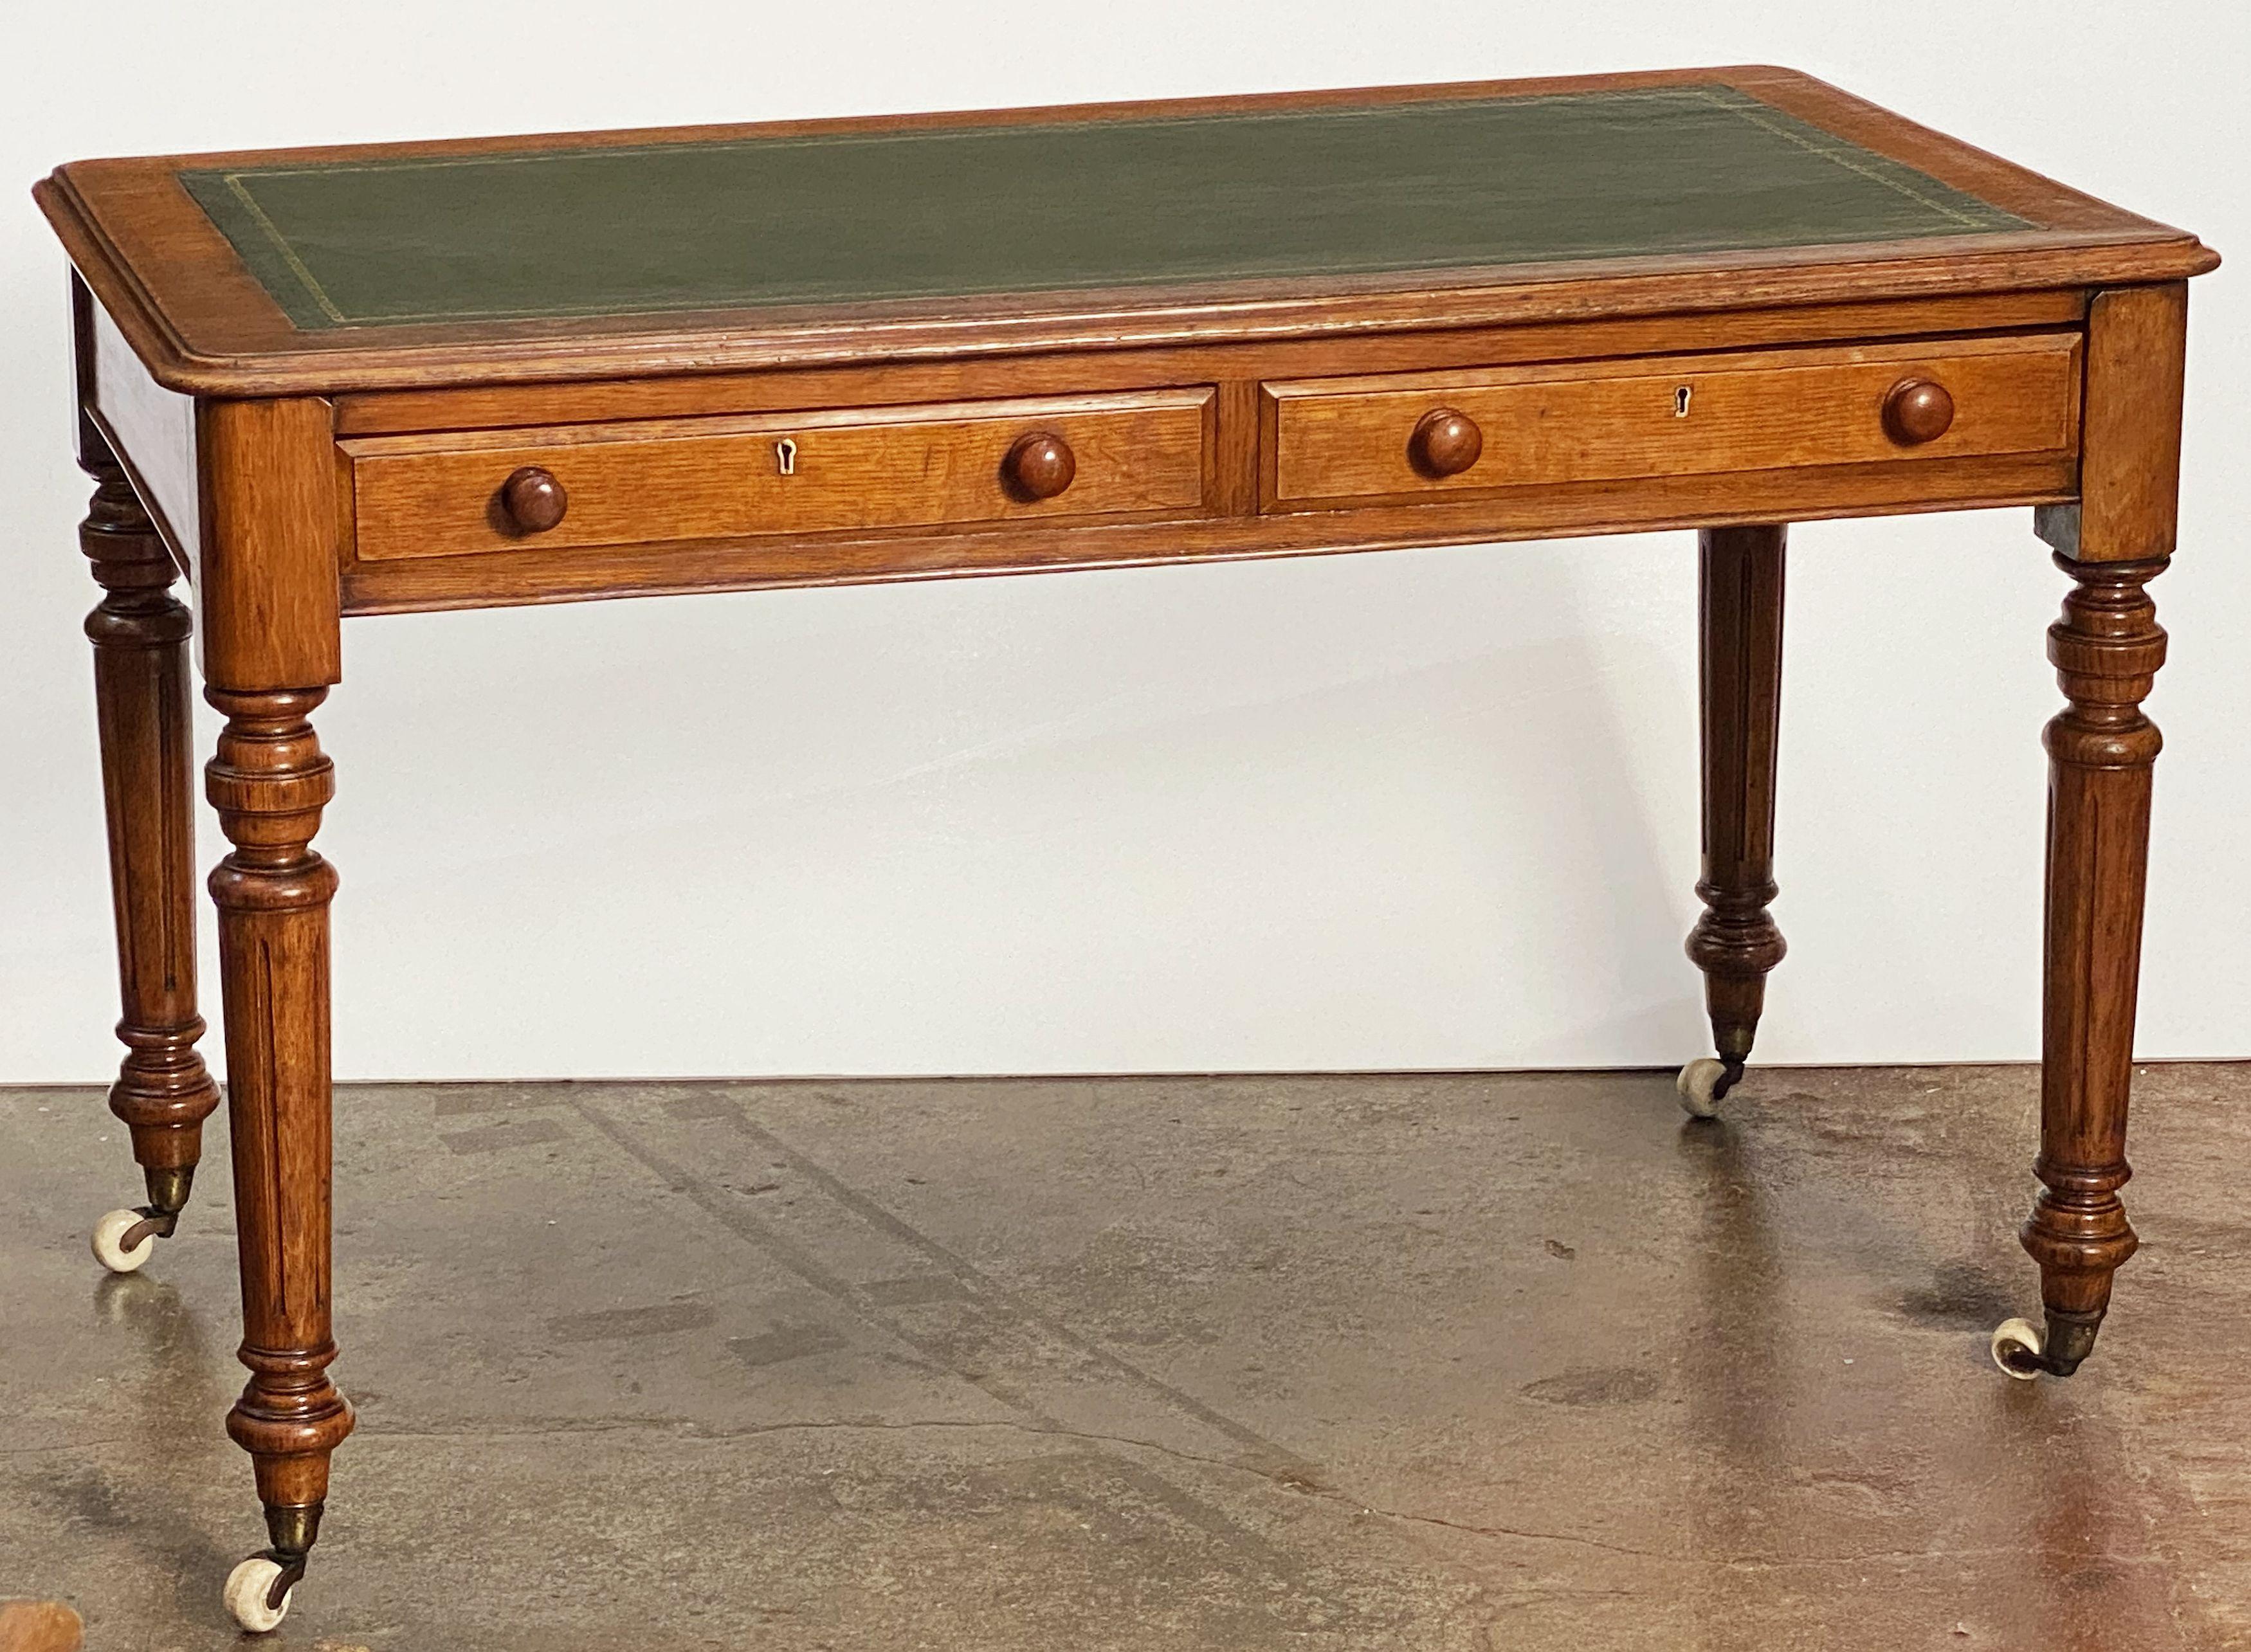 A handsome English writing desk or table of oak, circa 1880, attributed to the celebrated cabinetmakers, Gillows. 

Featuring an embossed leather top with an oak border and a moulded edge, over a frieze of two mahogany-lined drawers - each with